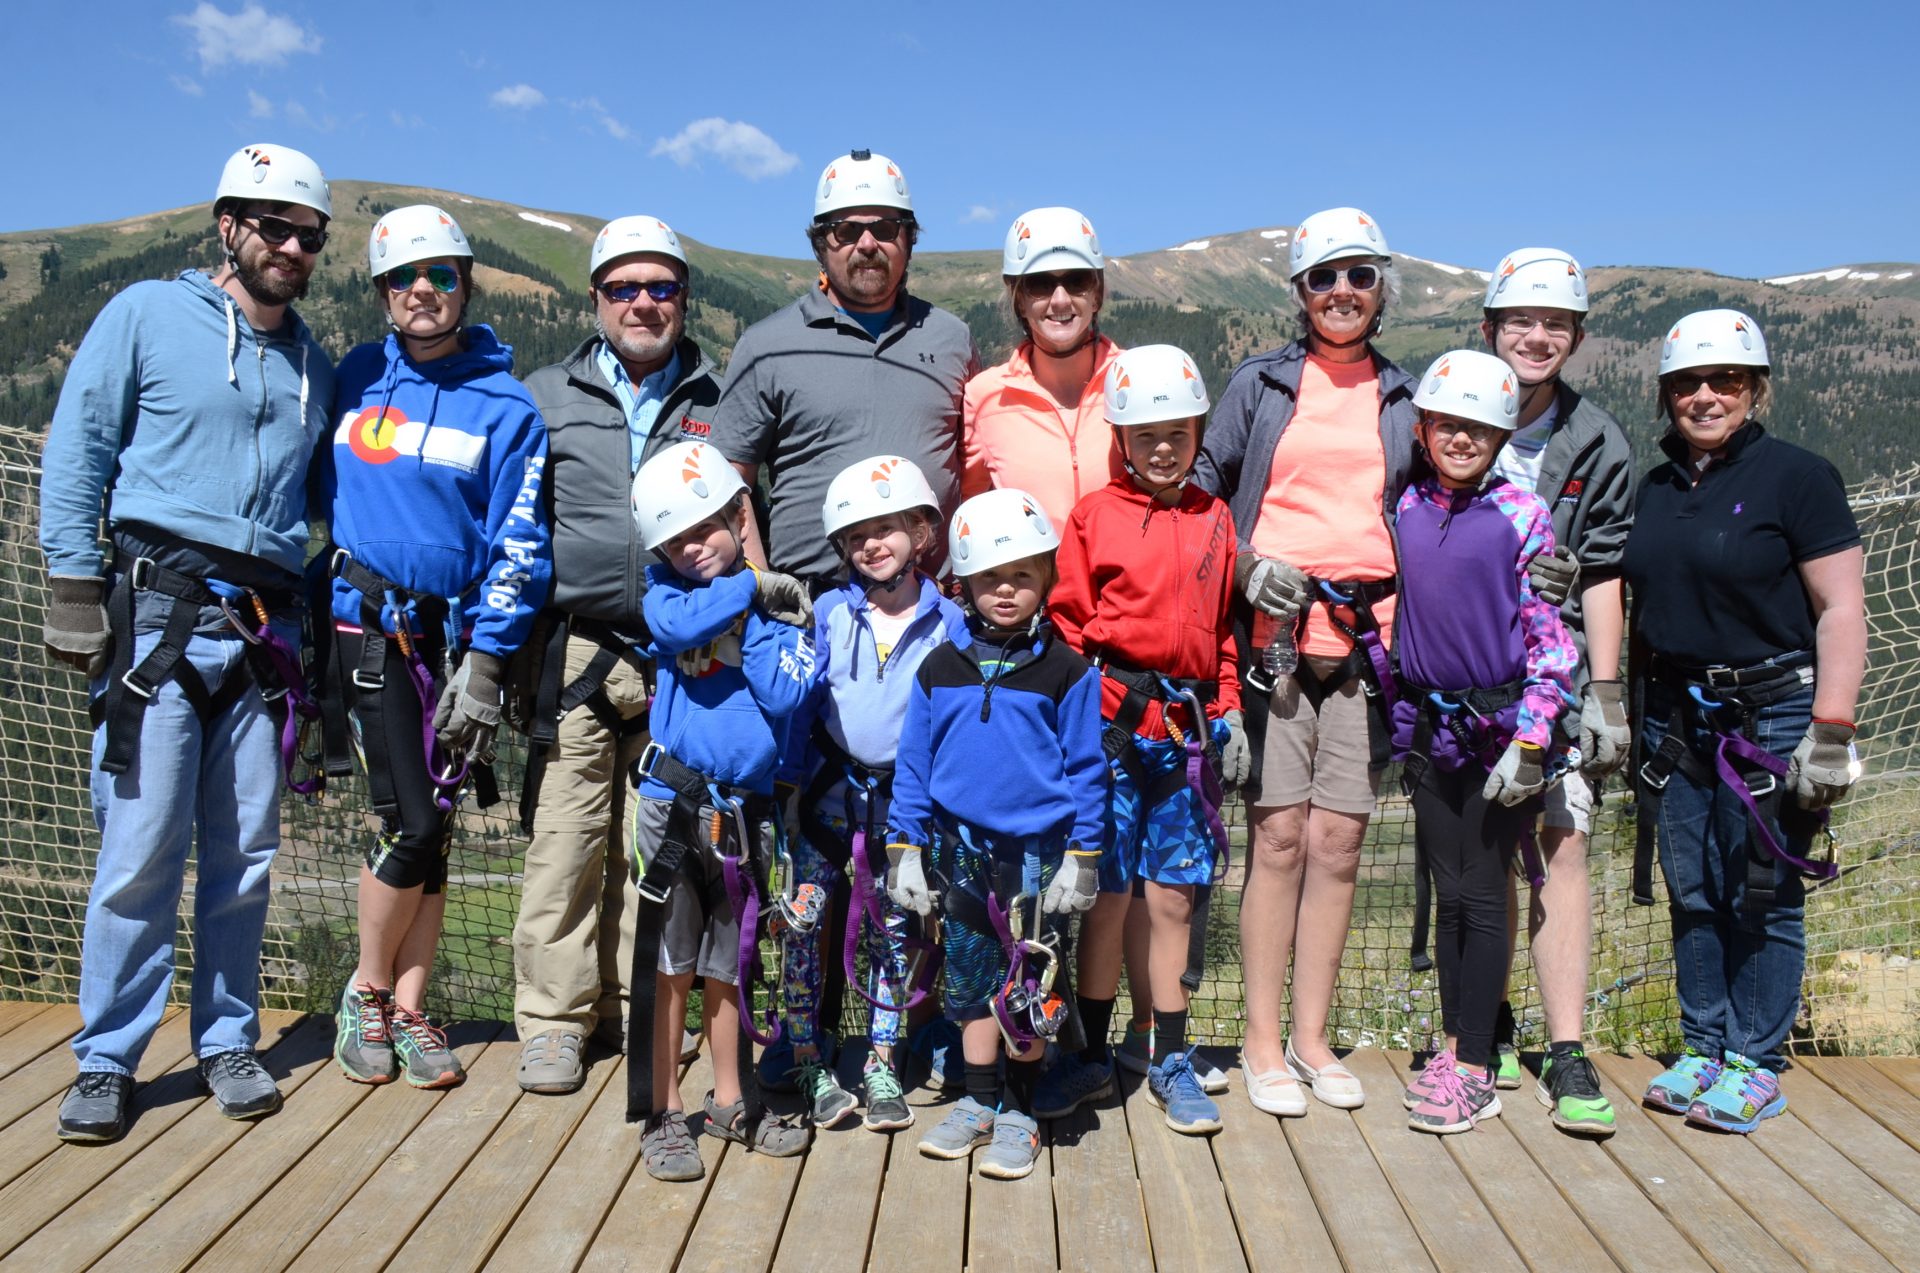 If you want to experience the adrenaline rush safely, try ziplining in Colorado with your family